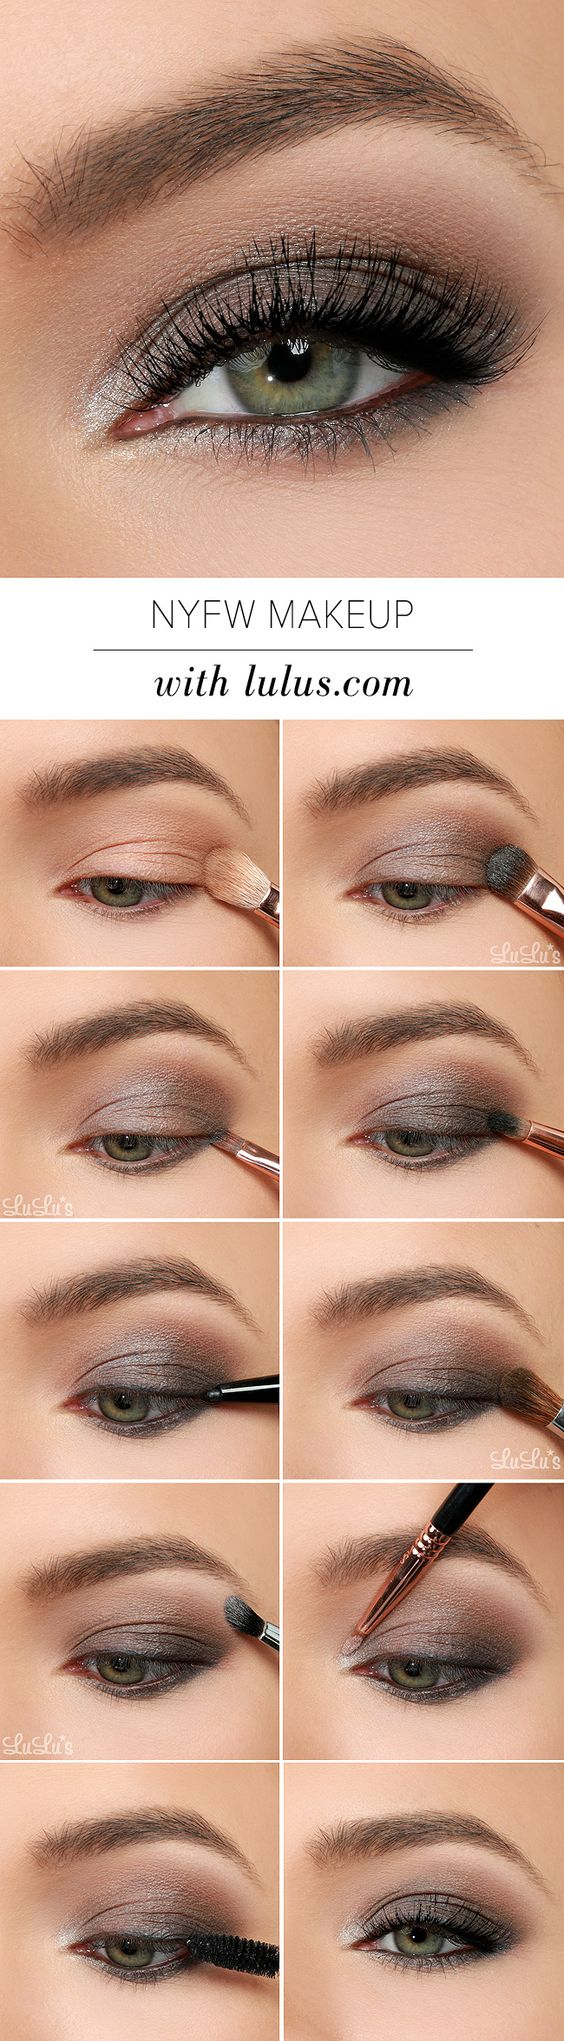 Makeup Ideas For Green Eyes 10 Great Eye Makeup Looks For Green Eyes Styles Weekly